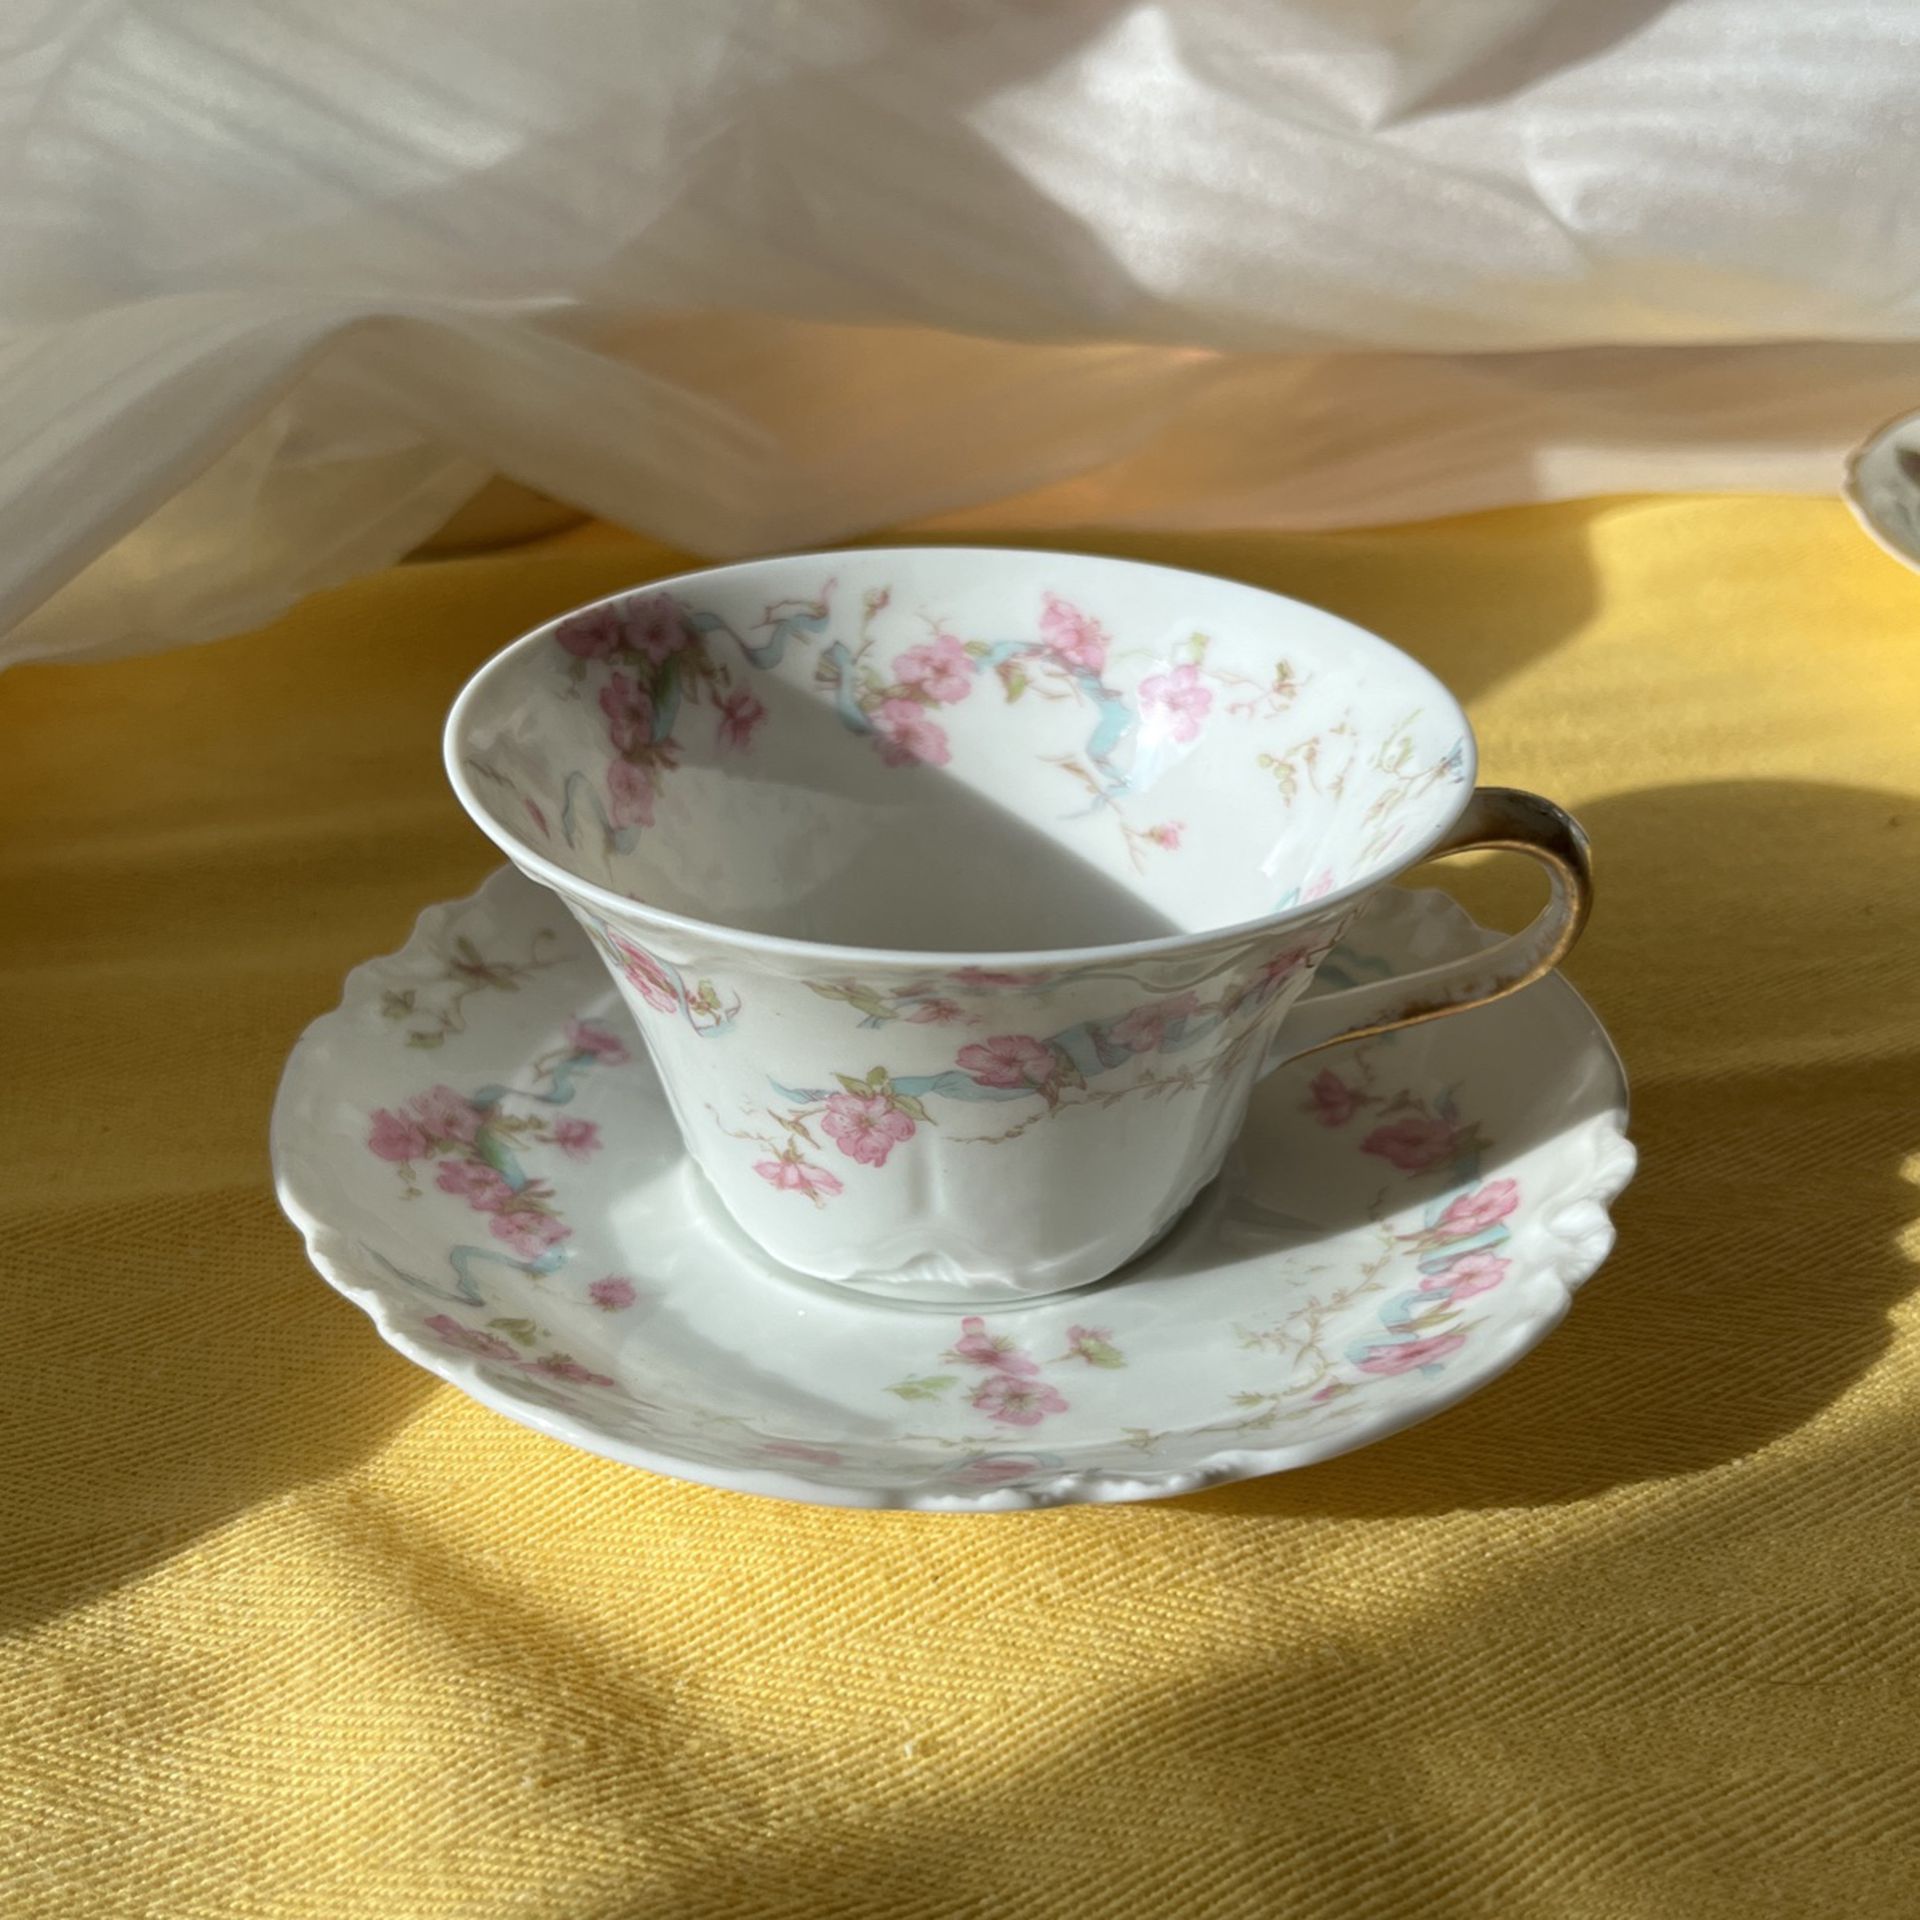 Antique Limoges china cup and saucer by Haviland in France